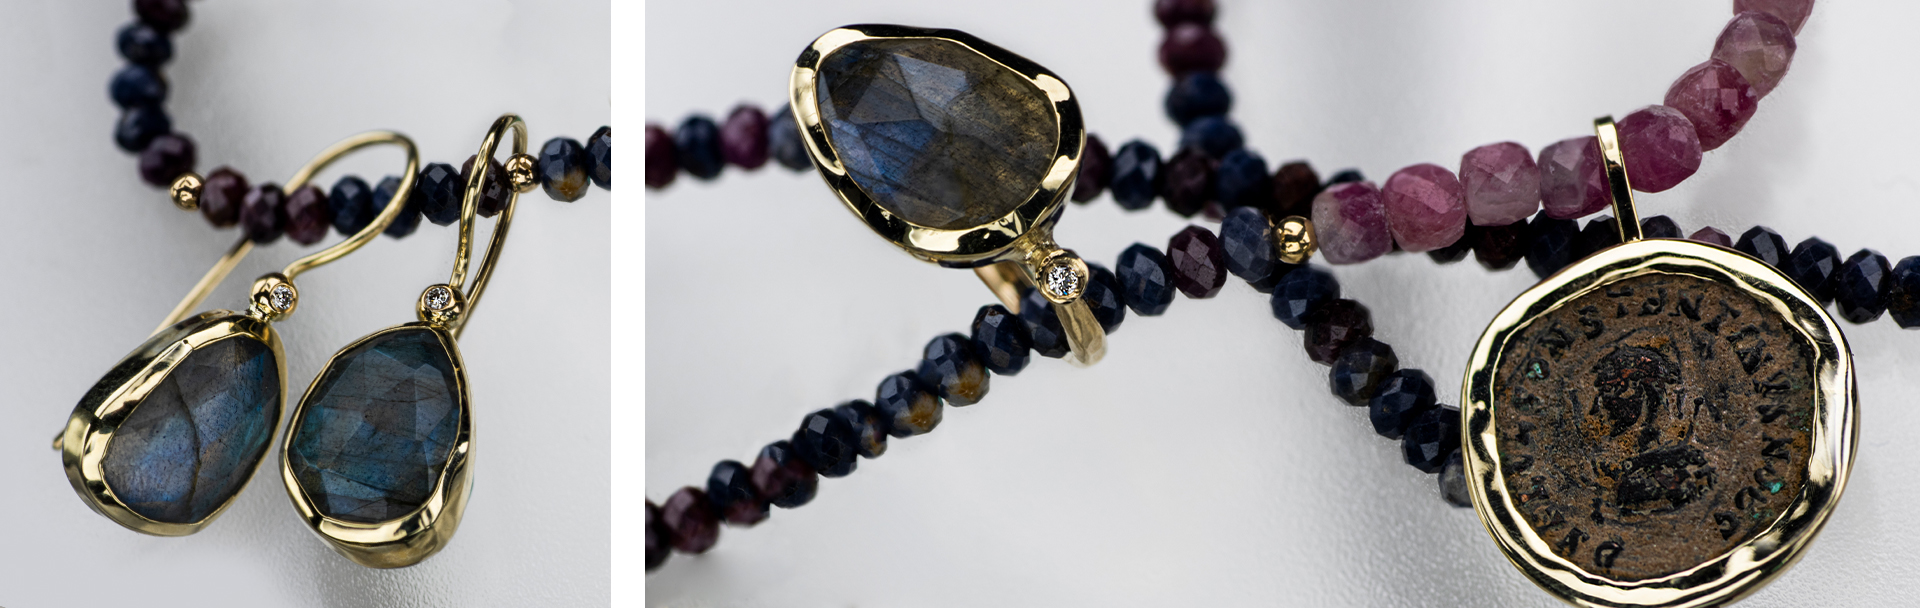 9K Gold Jewelry with Tourmaline, Labradorite and Sapphires